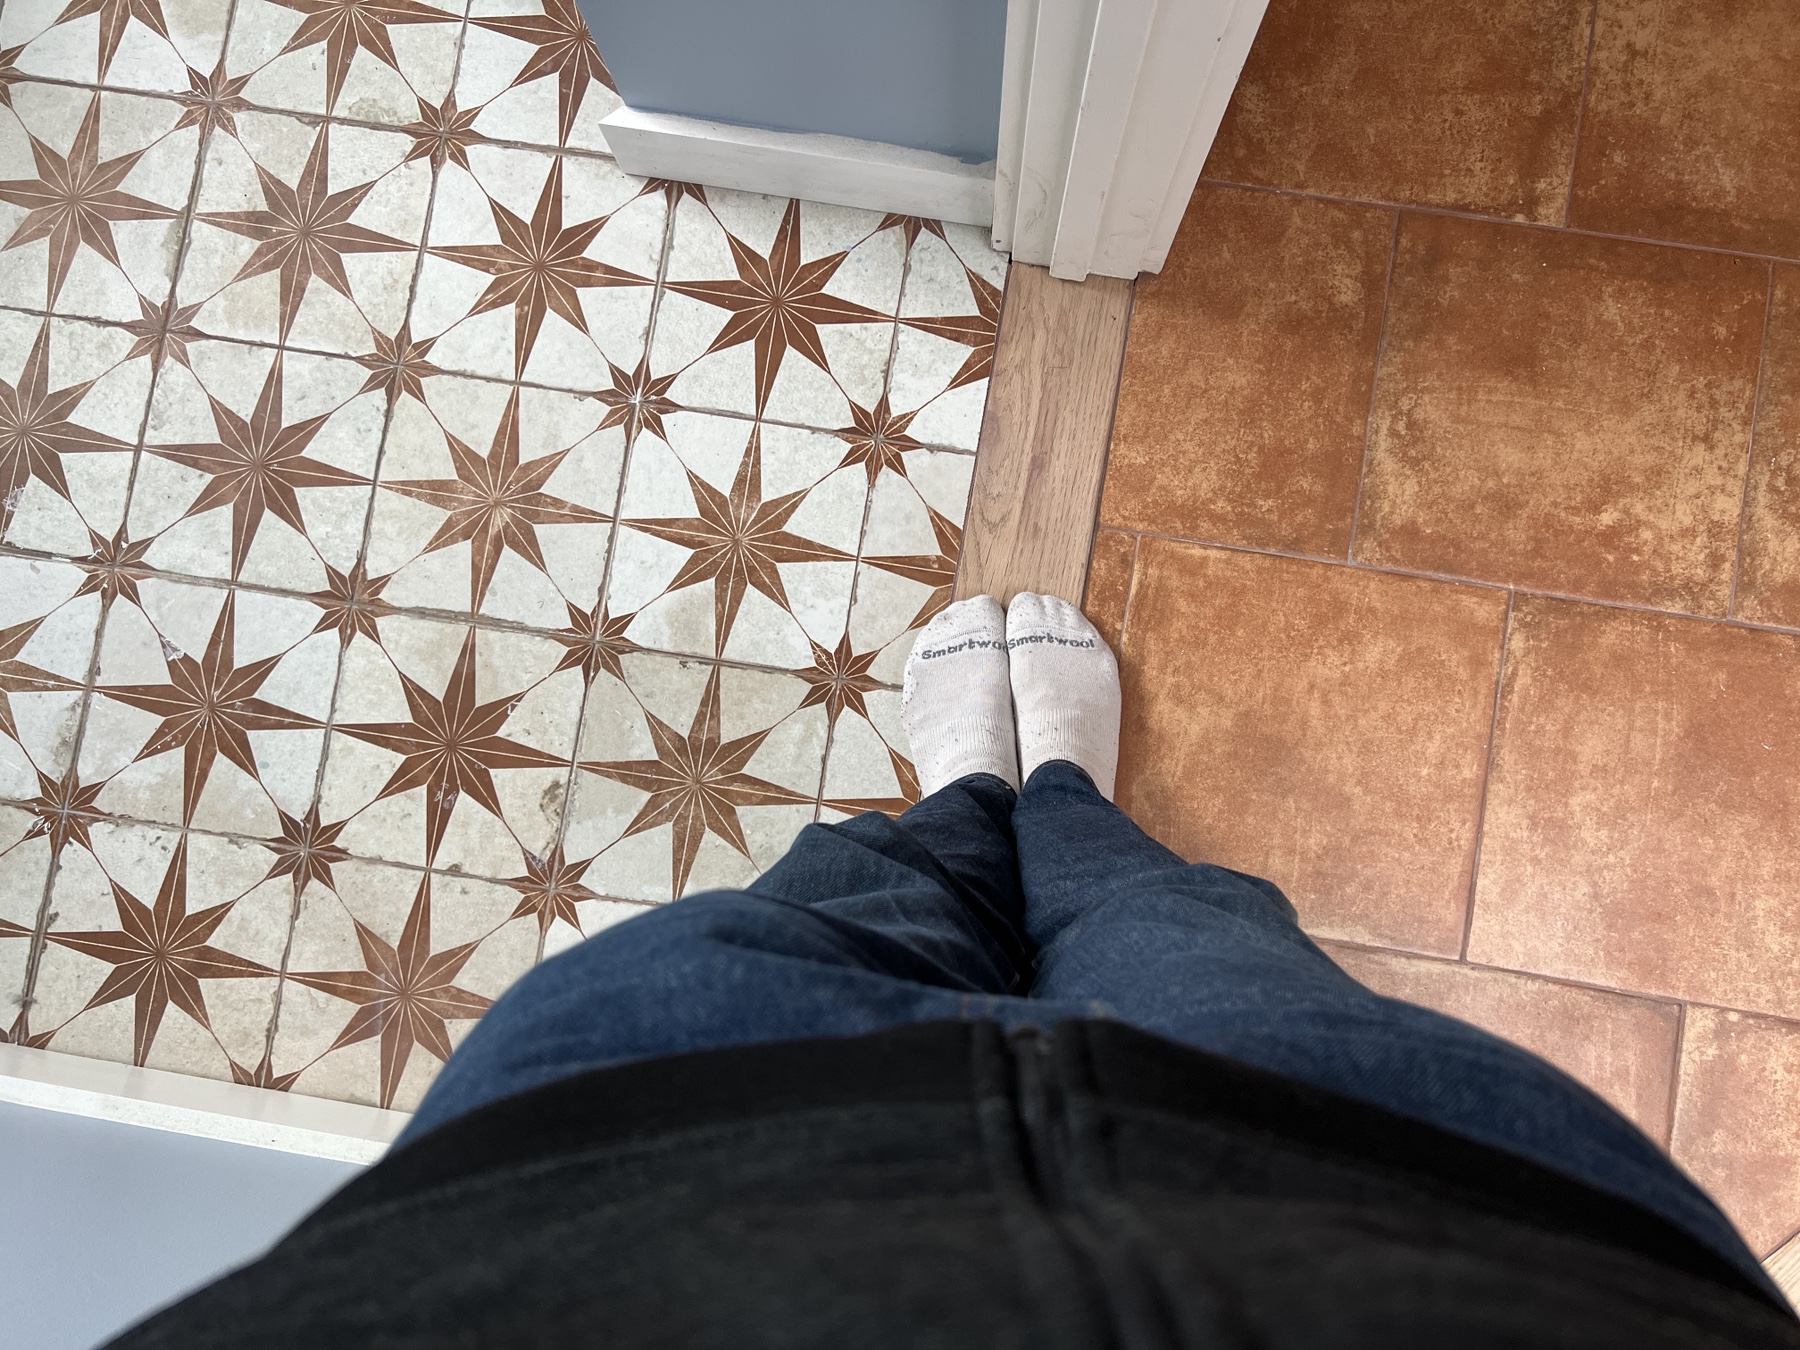 camera pointing at photographer's feet standing between two rooms with tiled floors